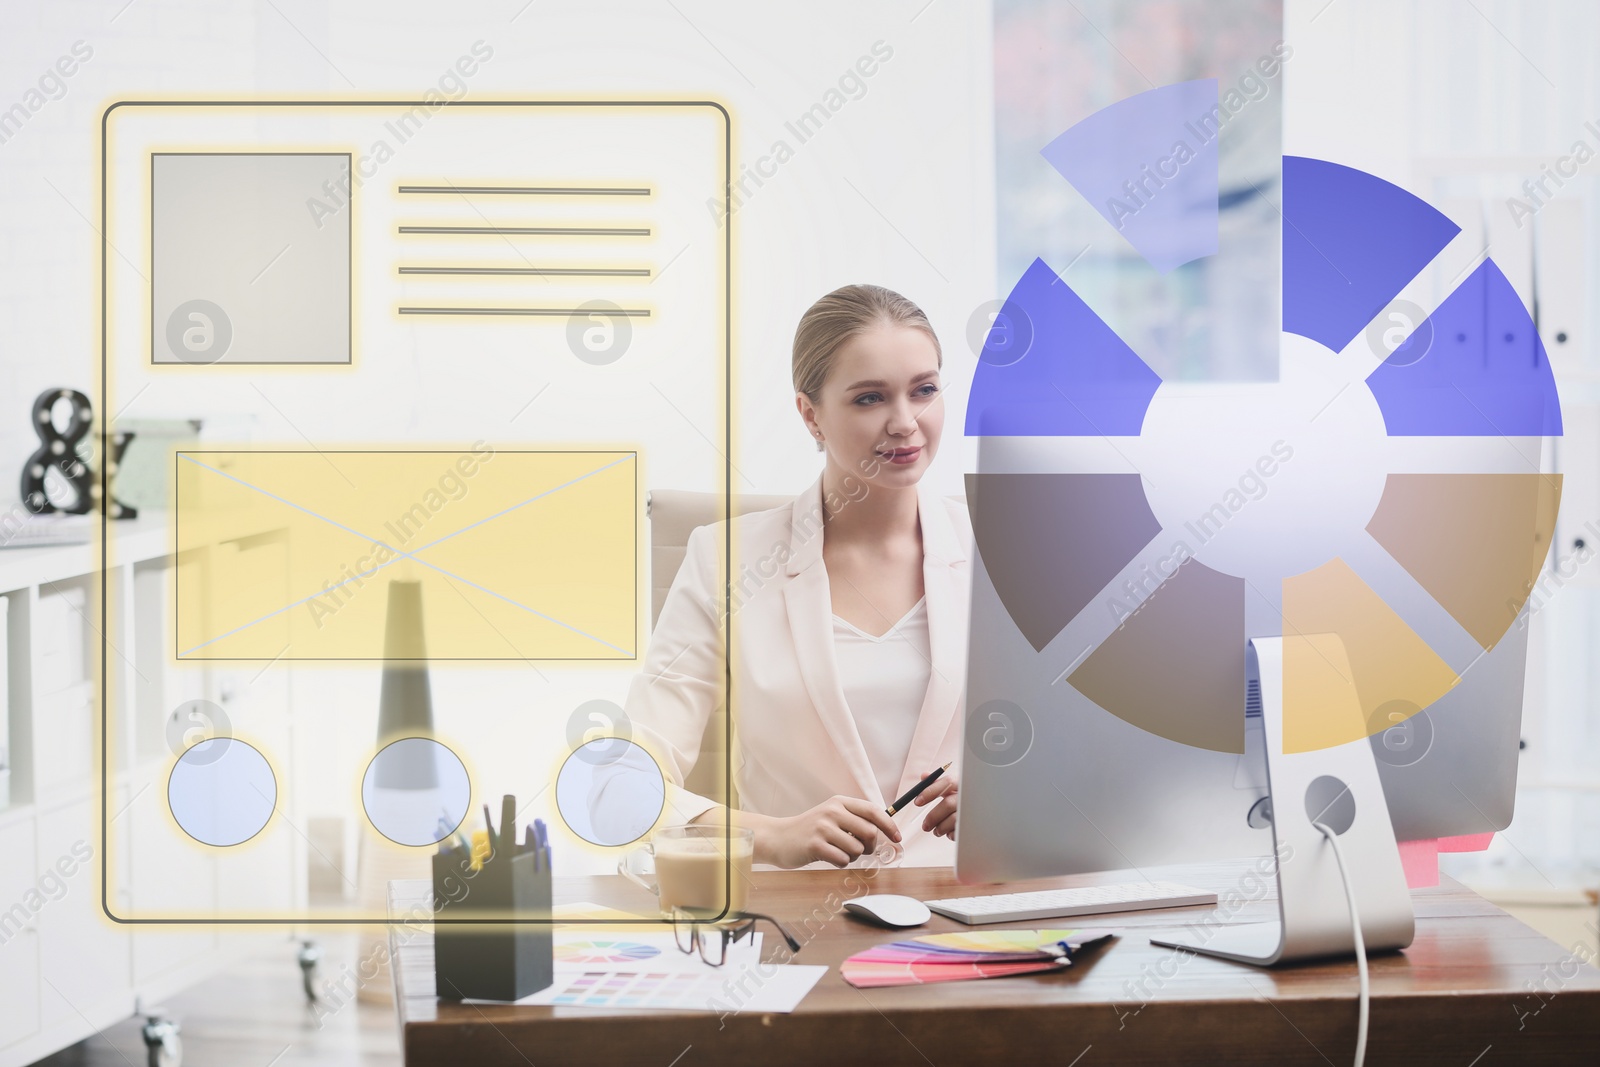 Image of Female designer working at desk in office and illustration of colorful graphs. Double exposure